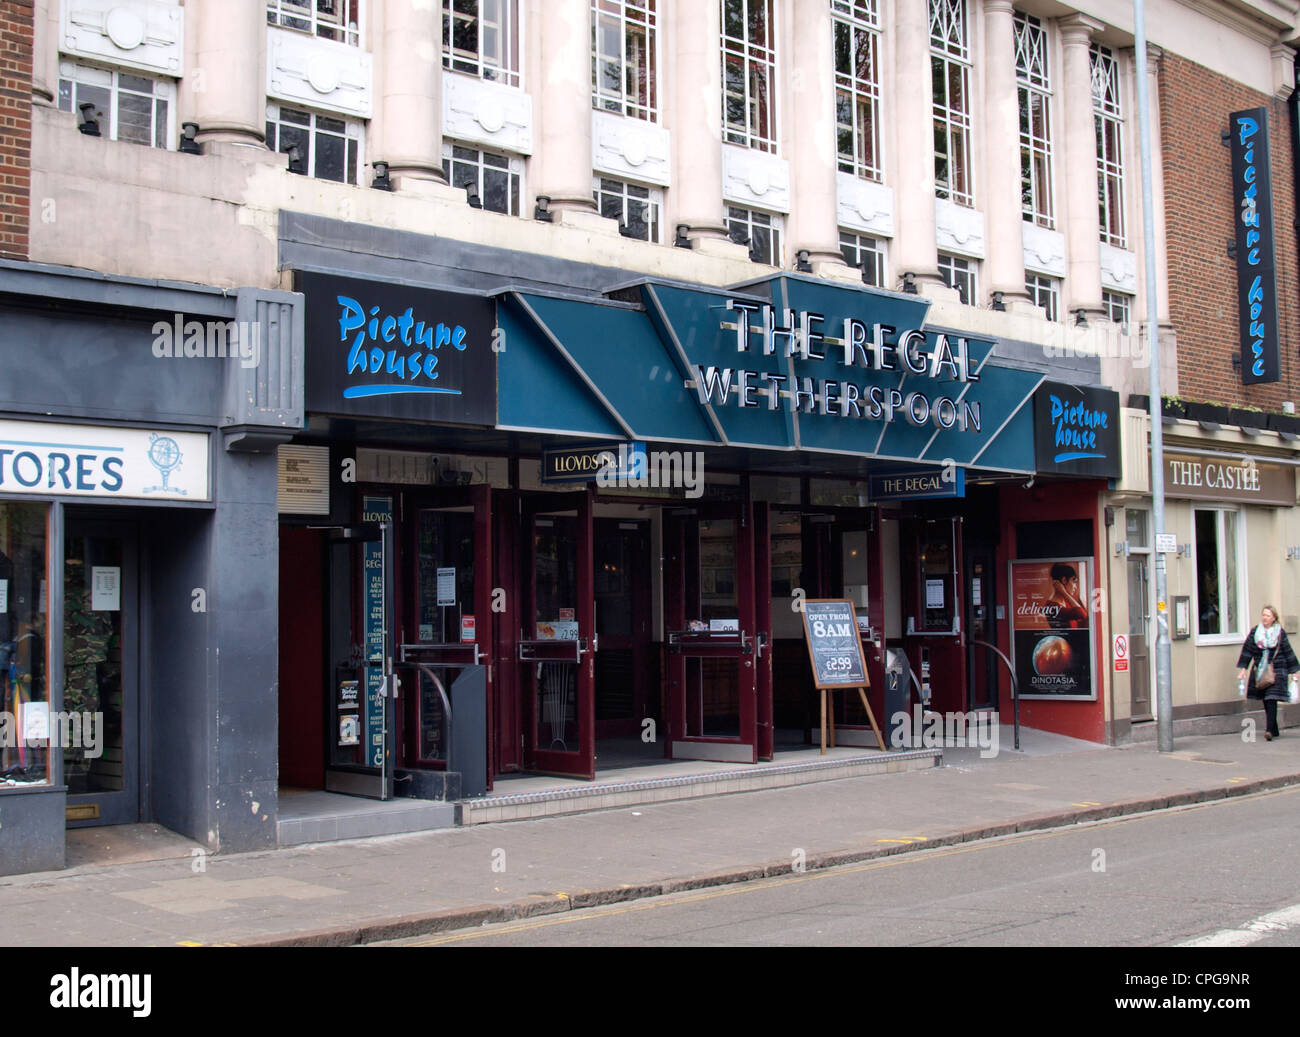 The Regal, Wetherspoons pub, with the Arts Picture house cinema ...